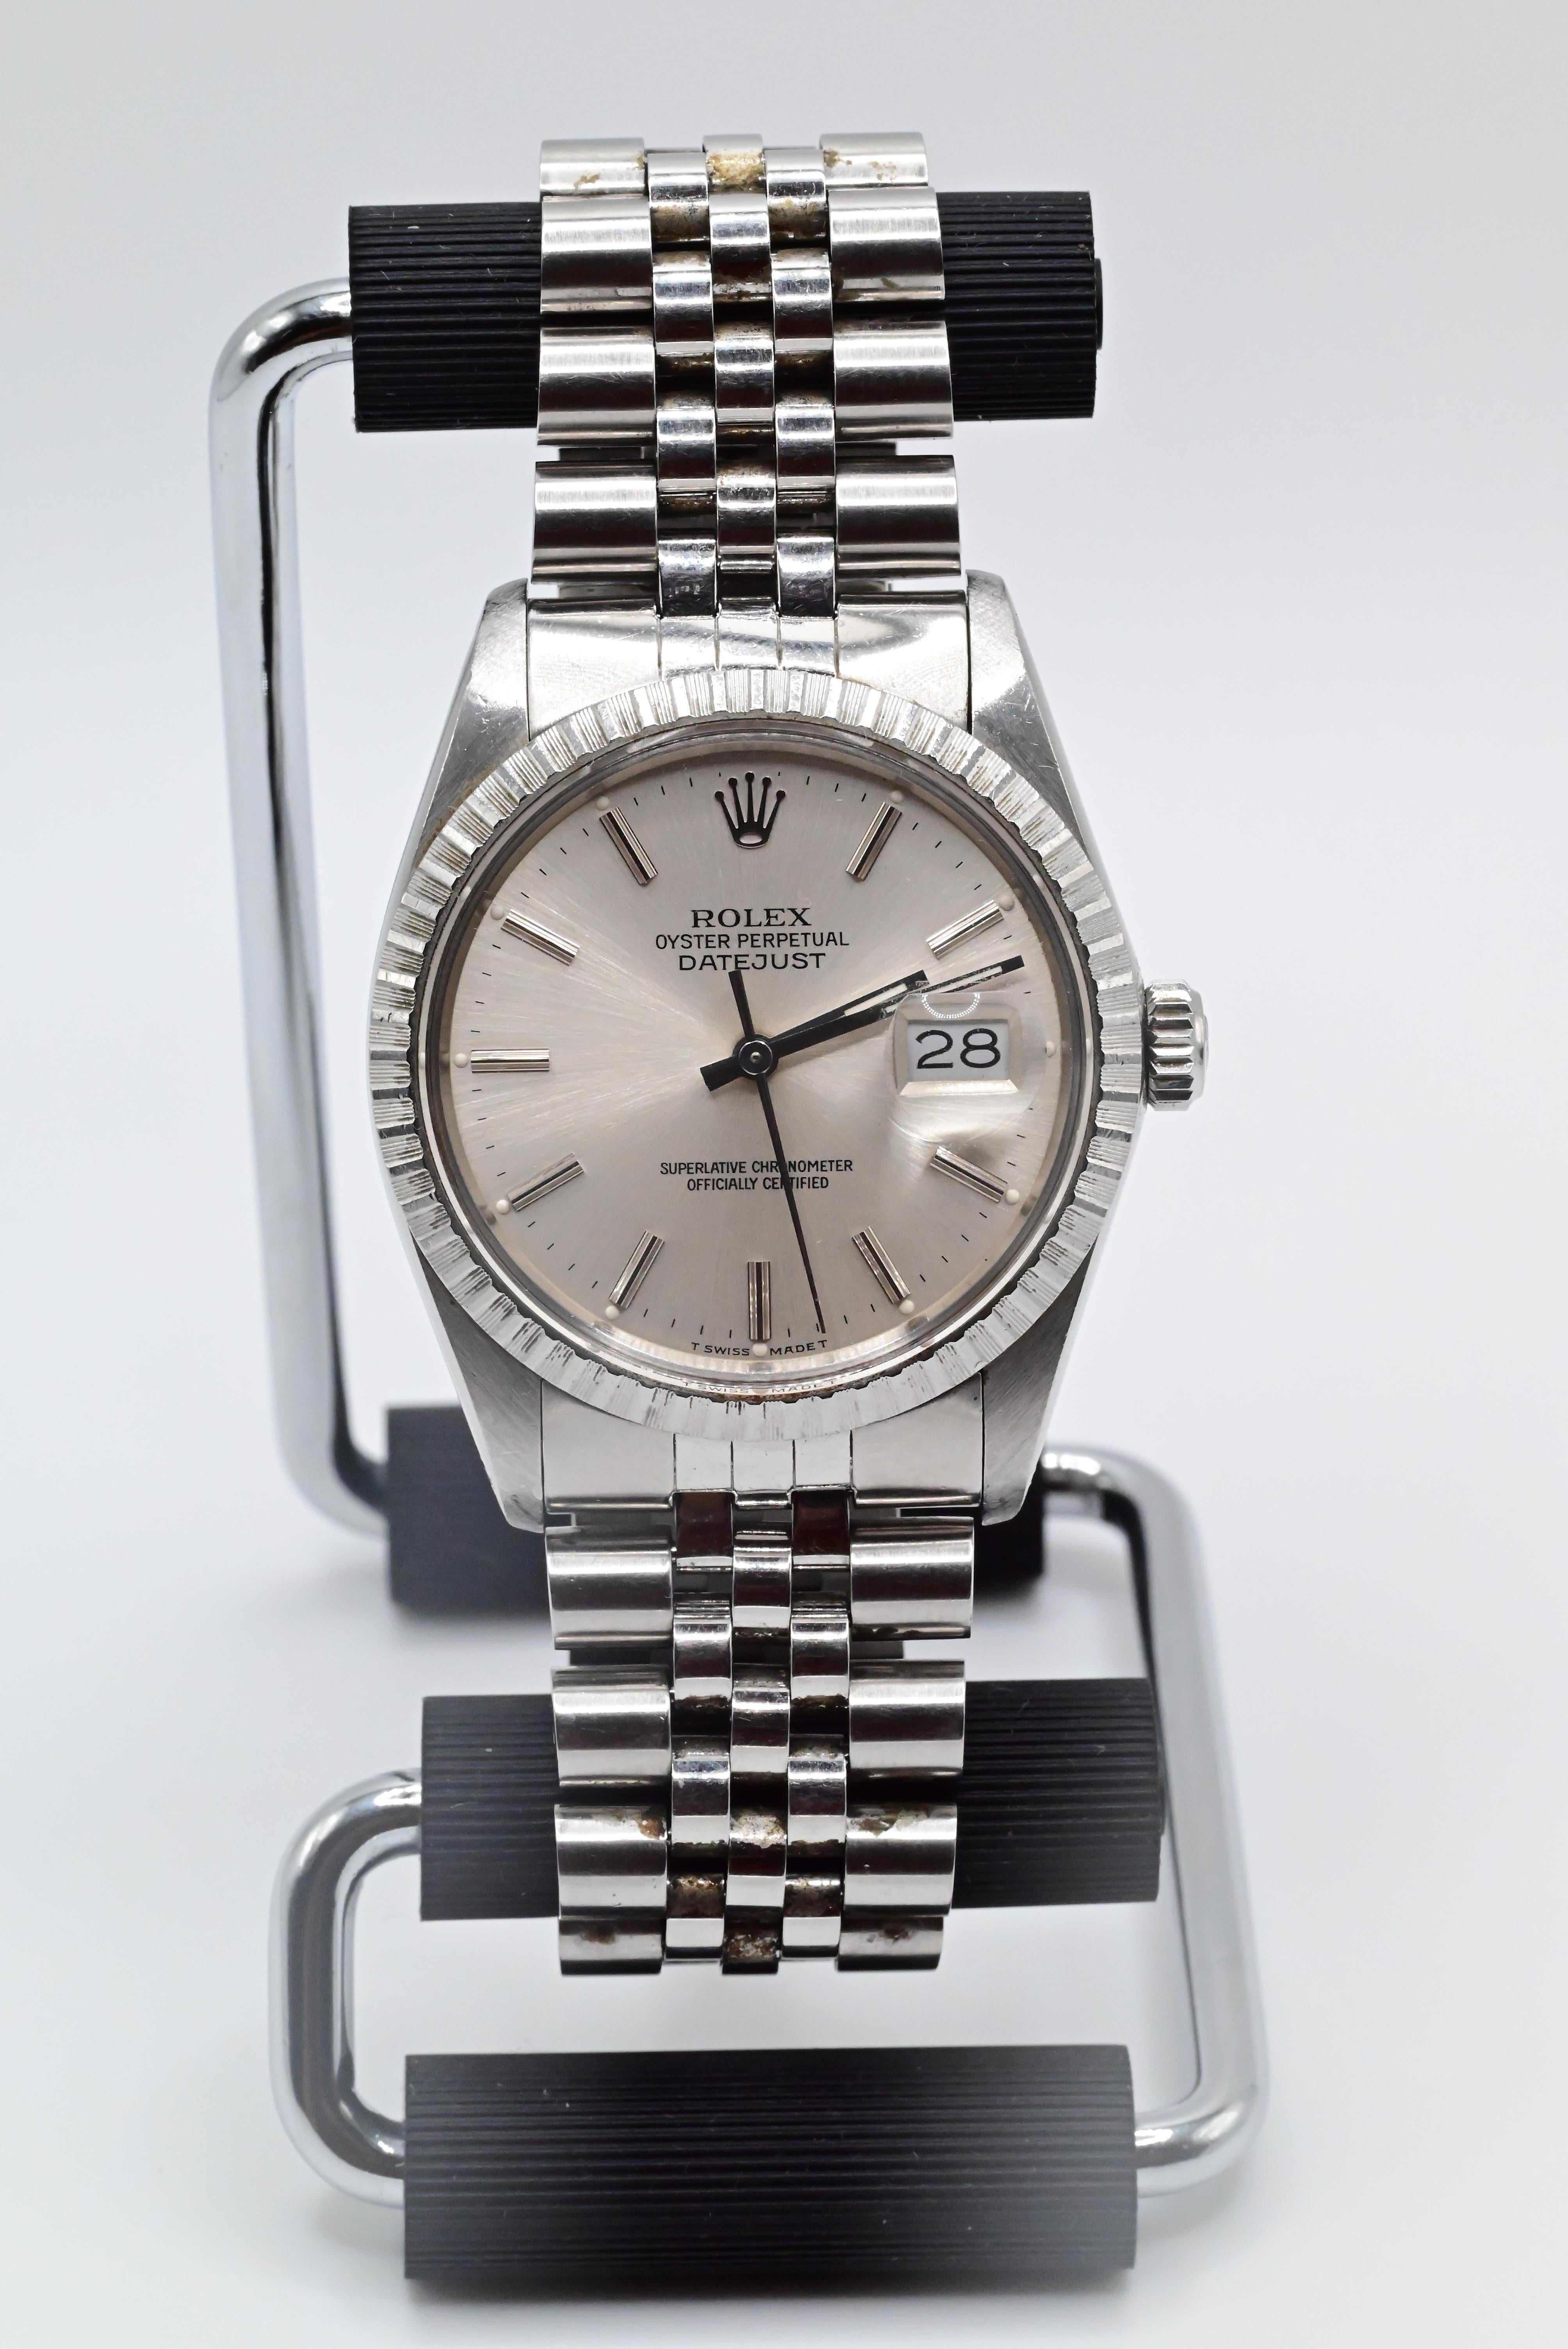 Rolex Wristwatch with Silver Dial 1602 Model
Model Datejust 
36MM Size Case
In Perfect Working Order
Has normal use ware but no damage 
Can be worn by Men or Women
No Box or Papers 
1987-1988 Model 
R66162


